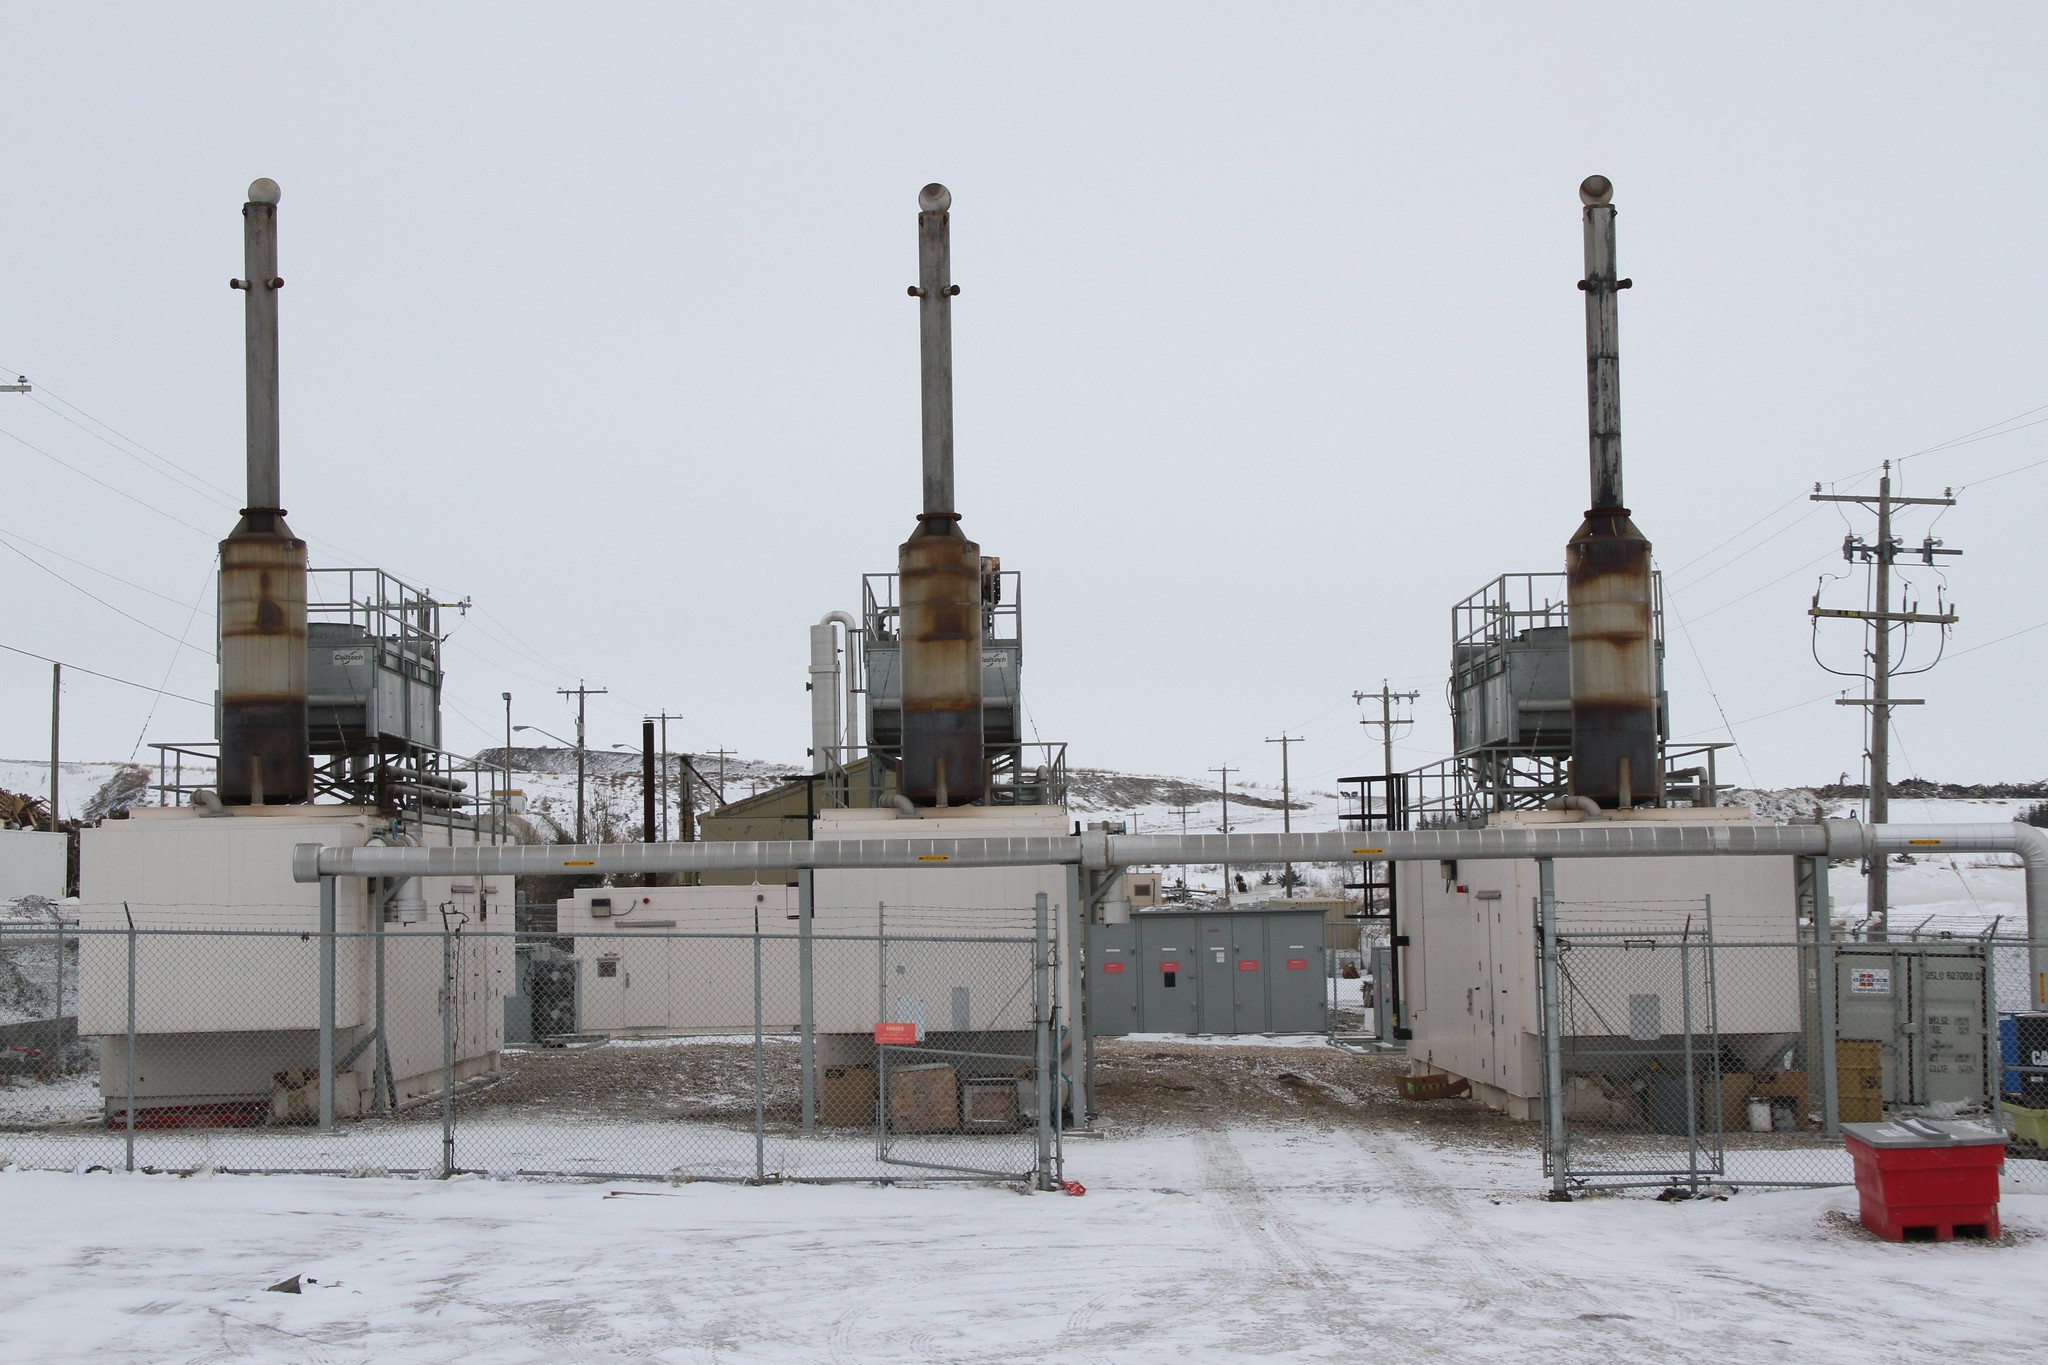 Siloxanes are typically removed from landfill gas but could be put to better use.